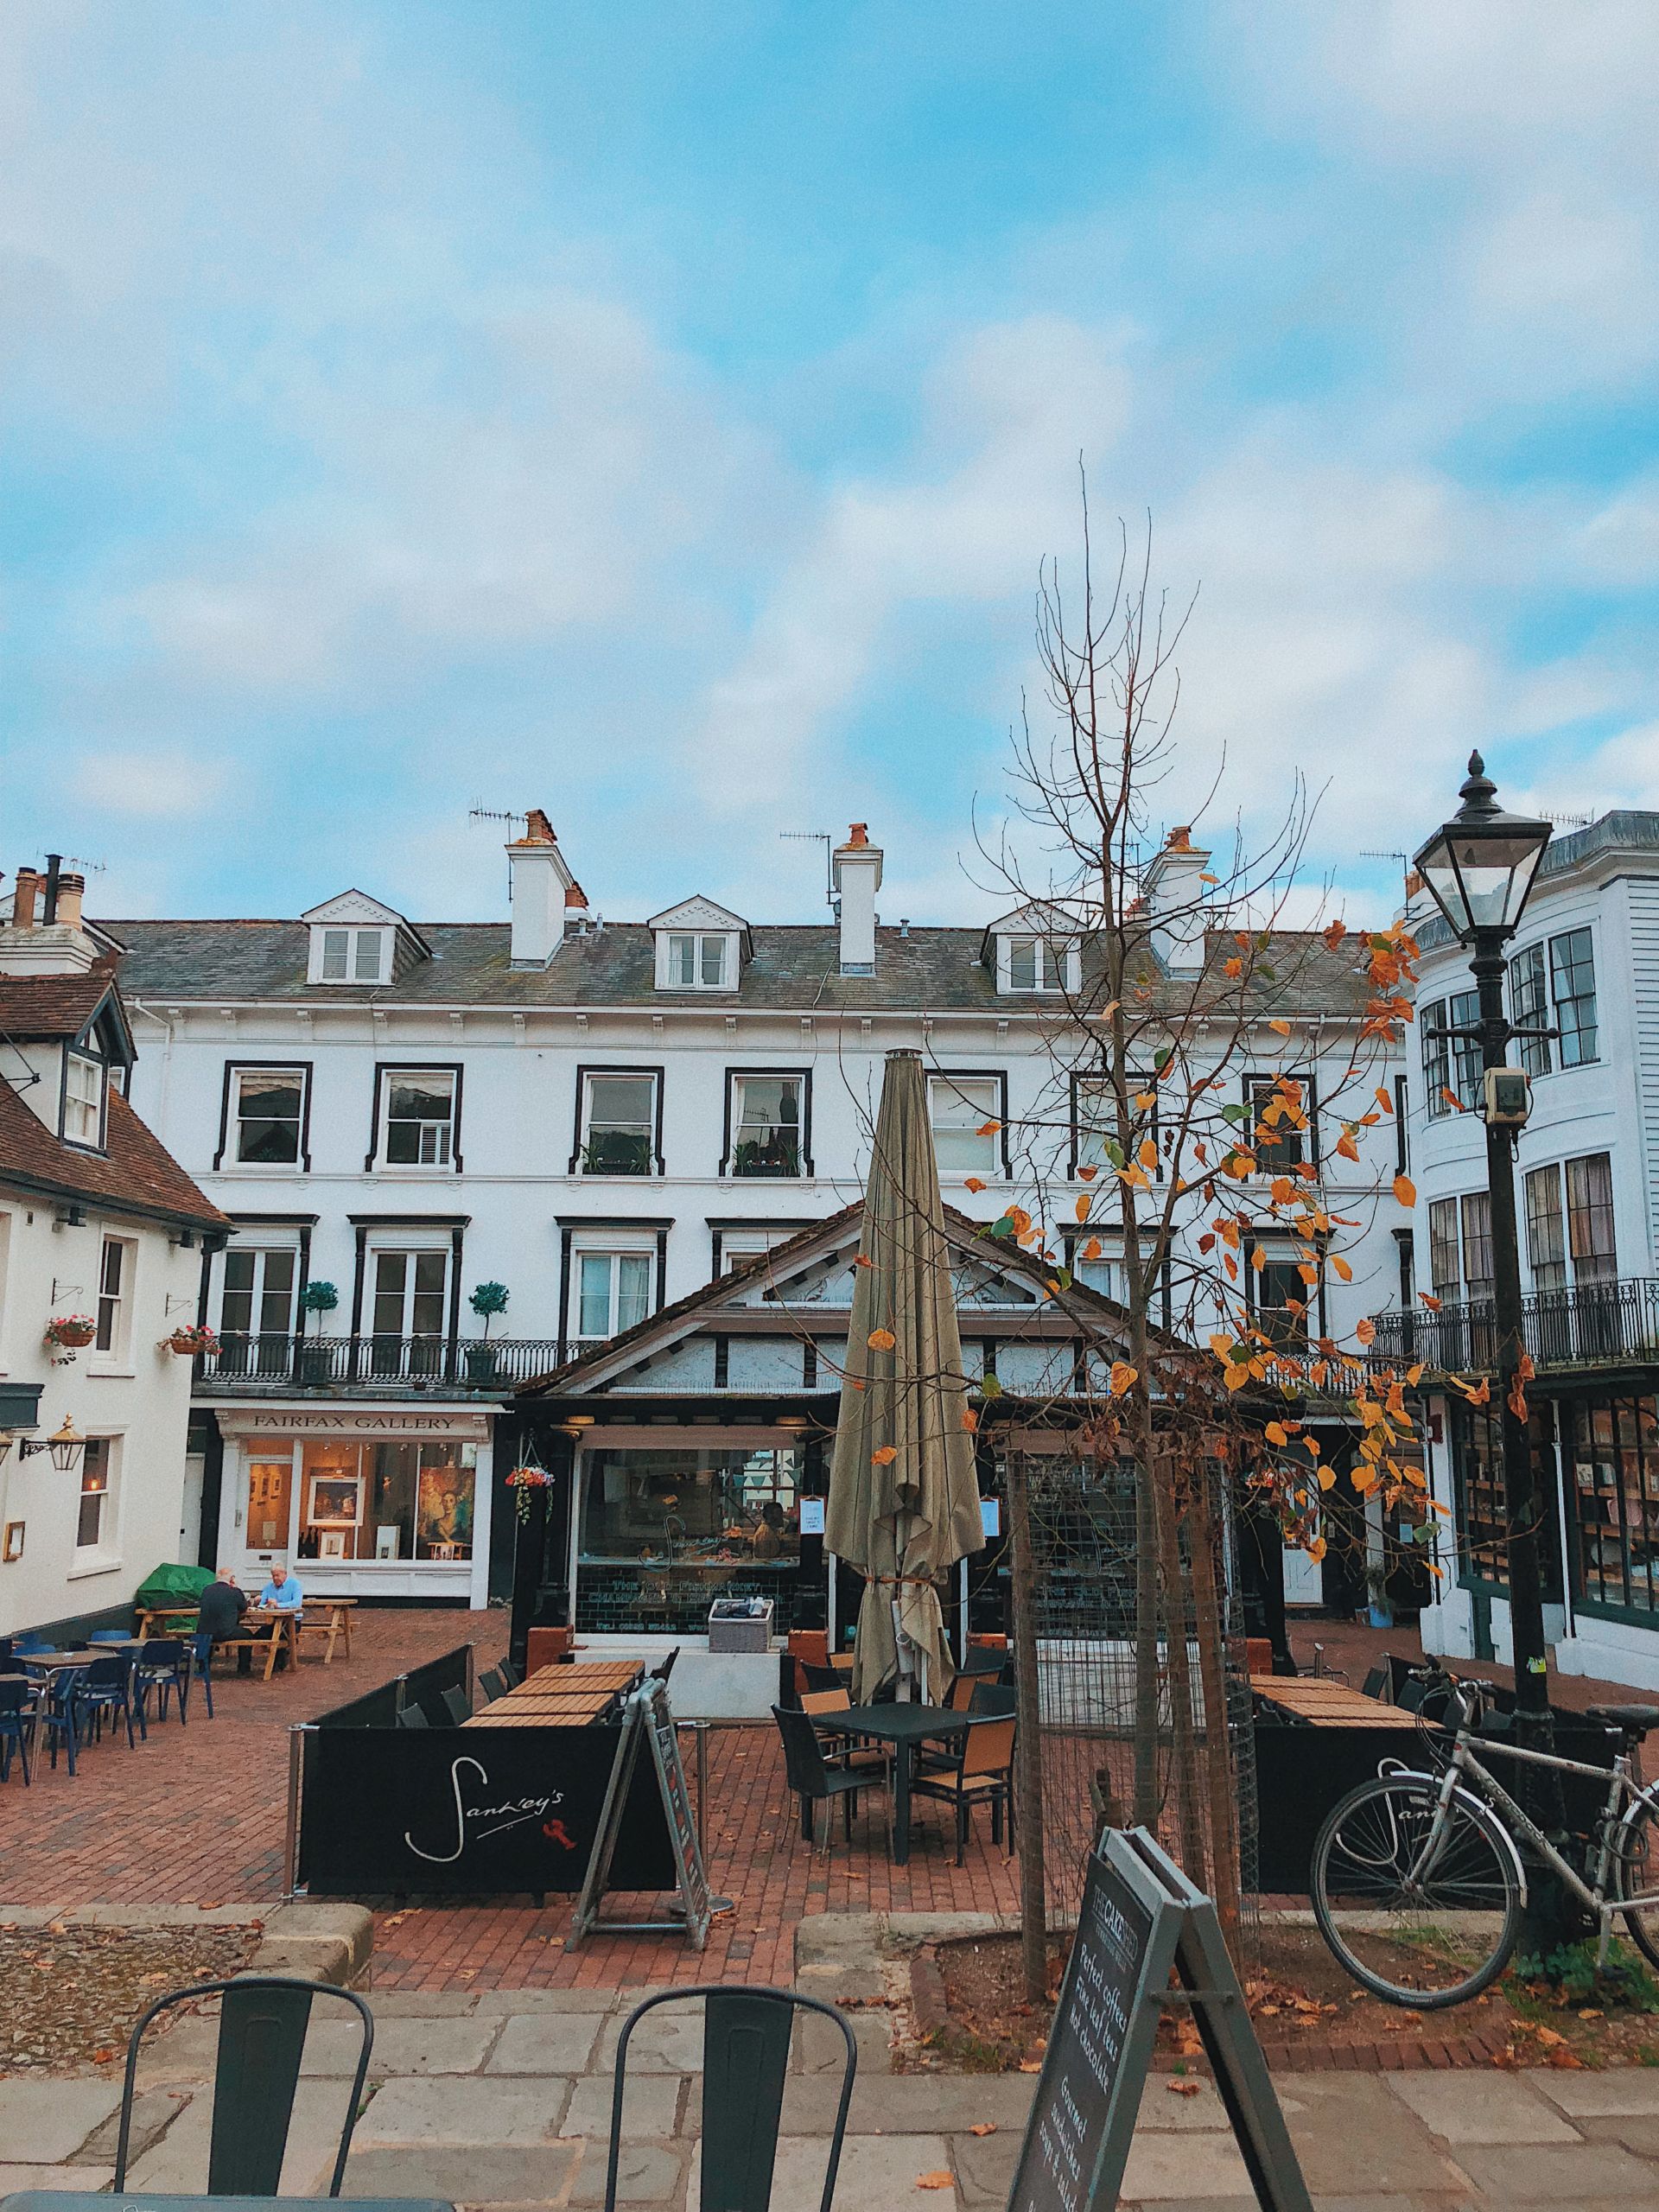 day trips out of london, tunbridge wells